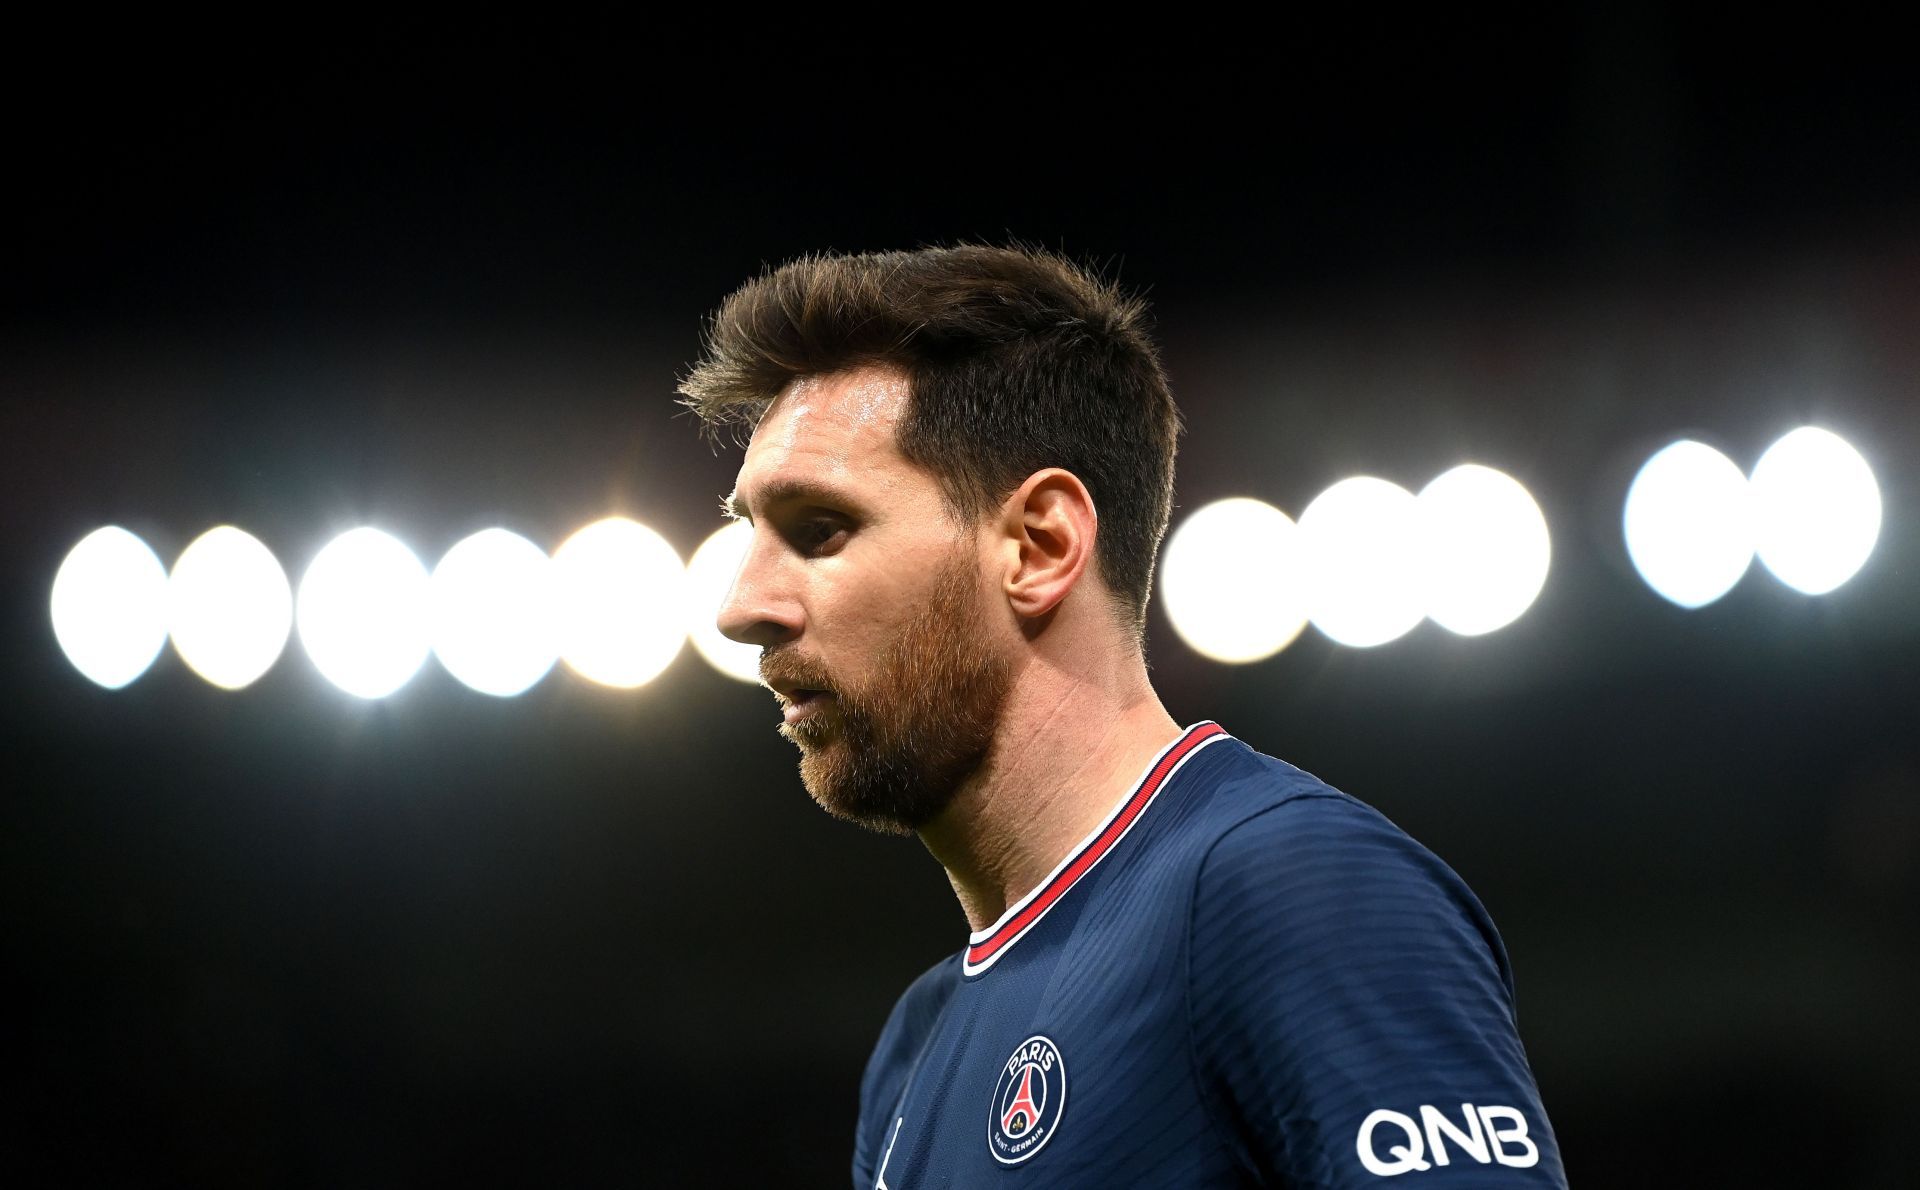 Lionel Messi joined PSG after leaving Barcelona this summer